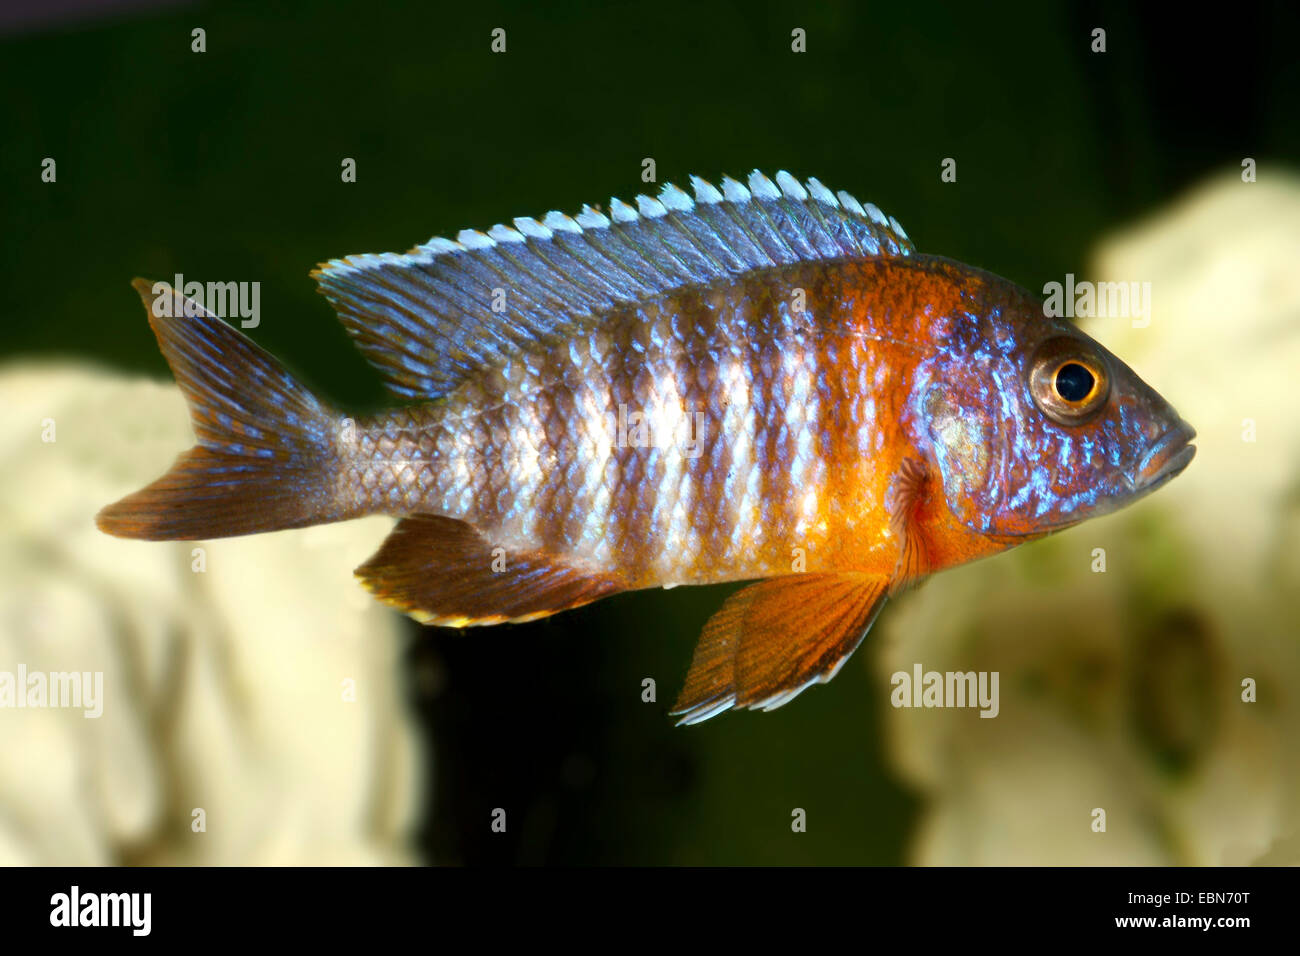 Red-shoulder Malawi peacock cichlid, Aulonocara Fort Maguire (Aulonocara hansbaenschi), swimming Stock Photo